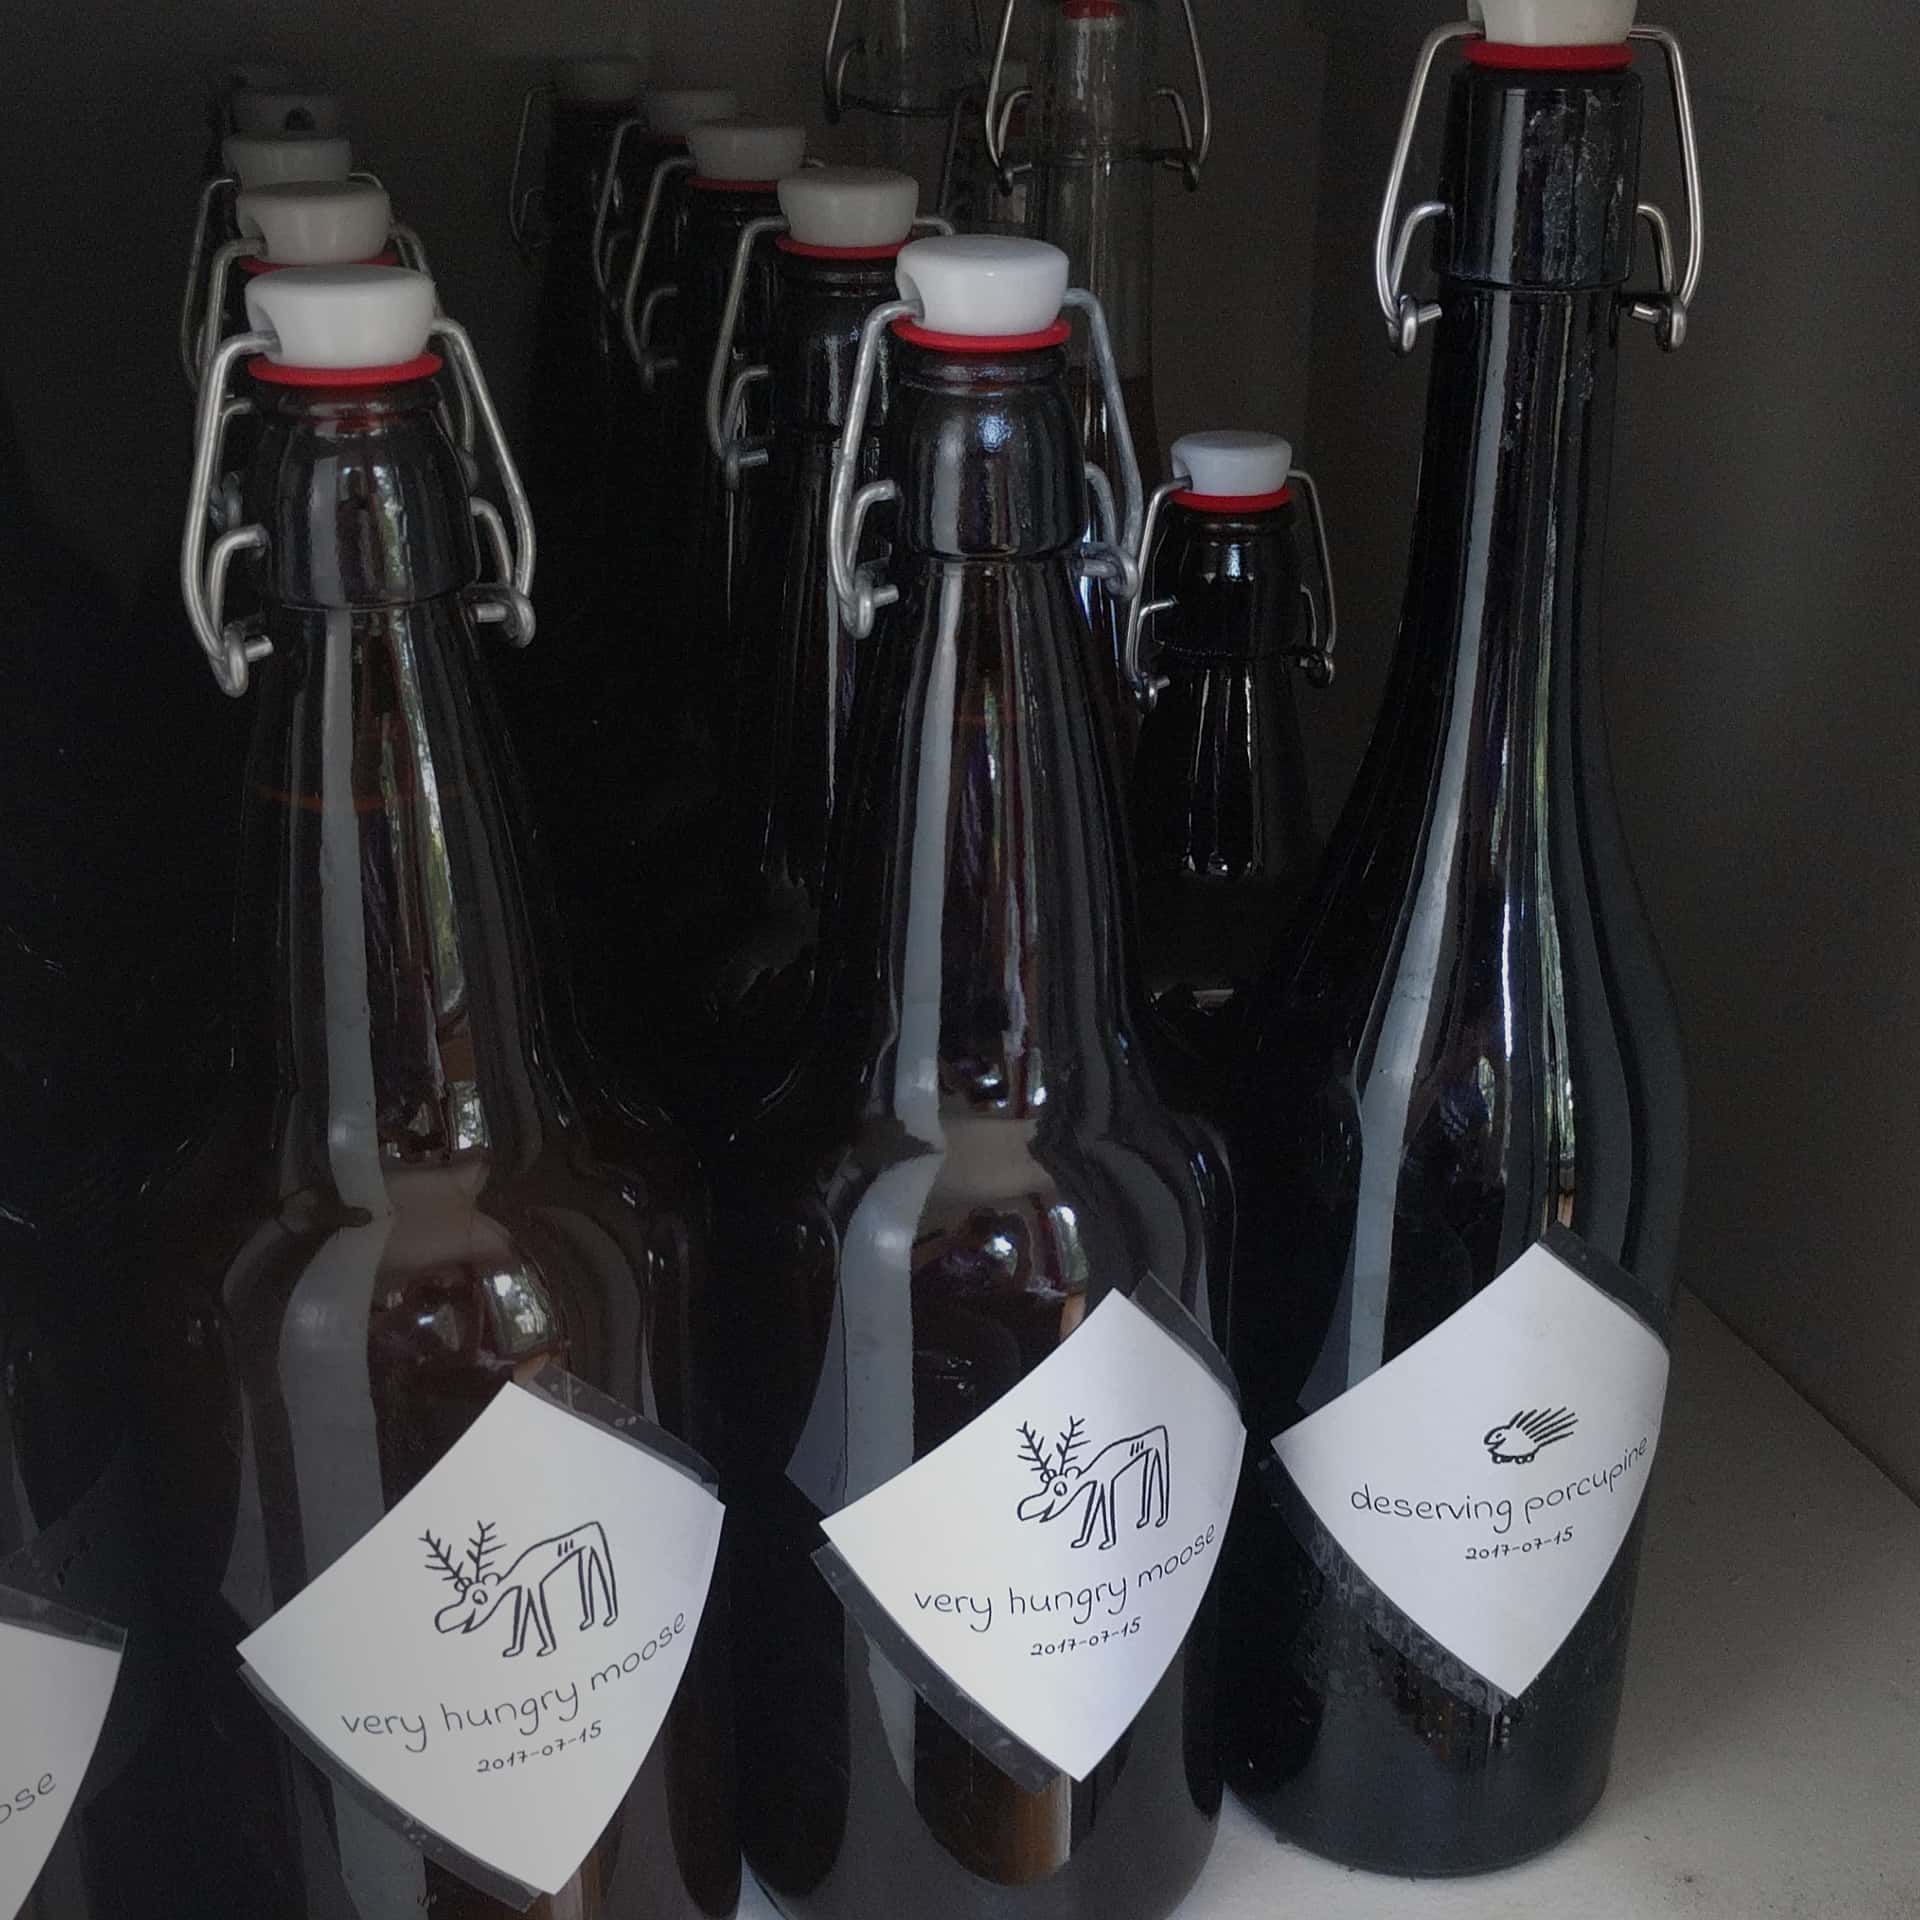 homebrew beer bottles labeled “very hungry moose” and “deserving porcupine”